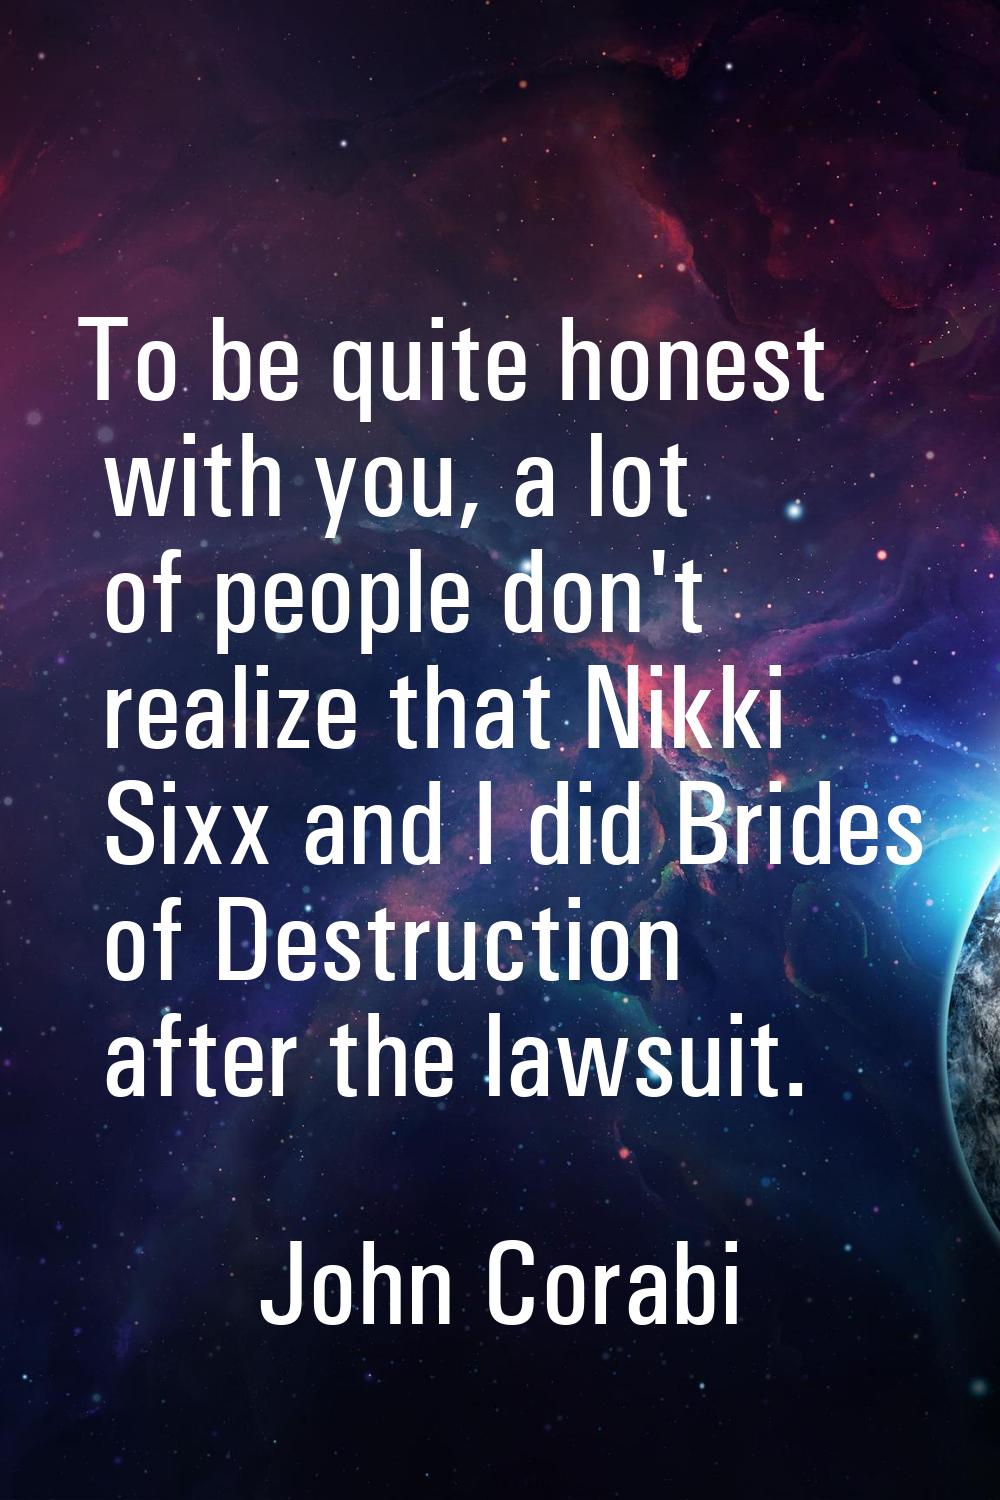 To be quite honest with you, a lot of people don't realize that Nikki Sixx and I did Brides of Dest